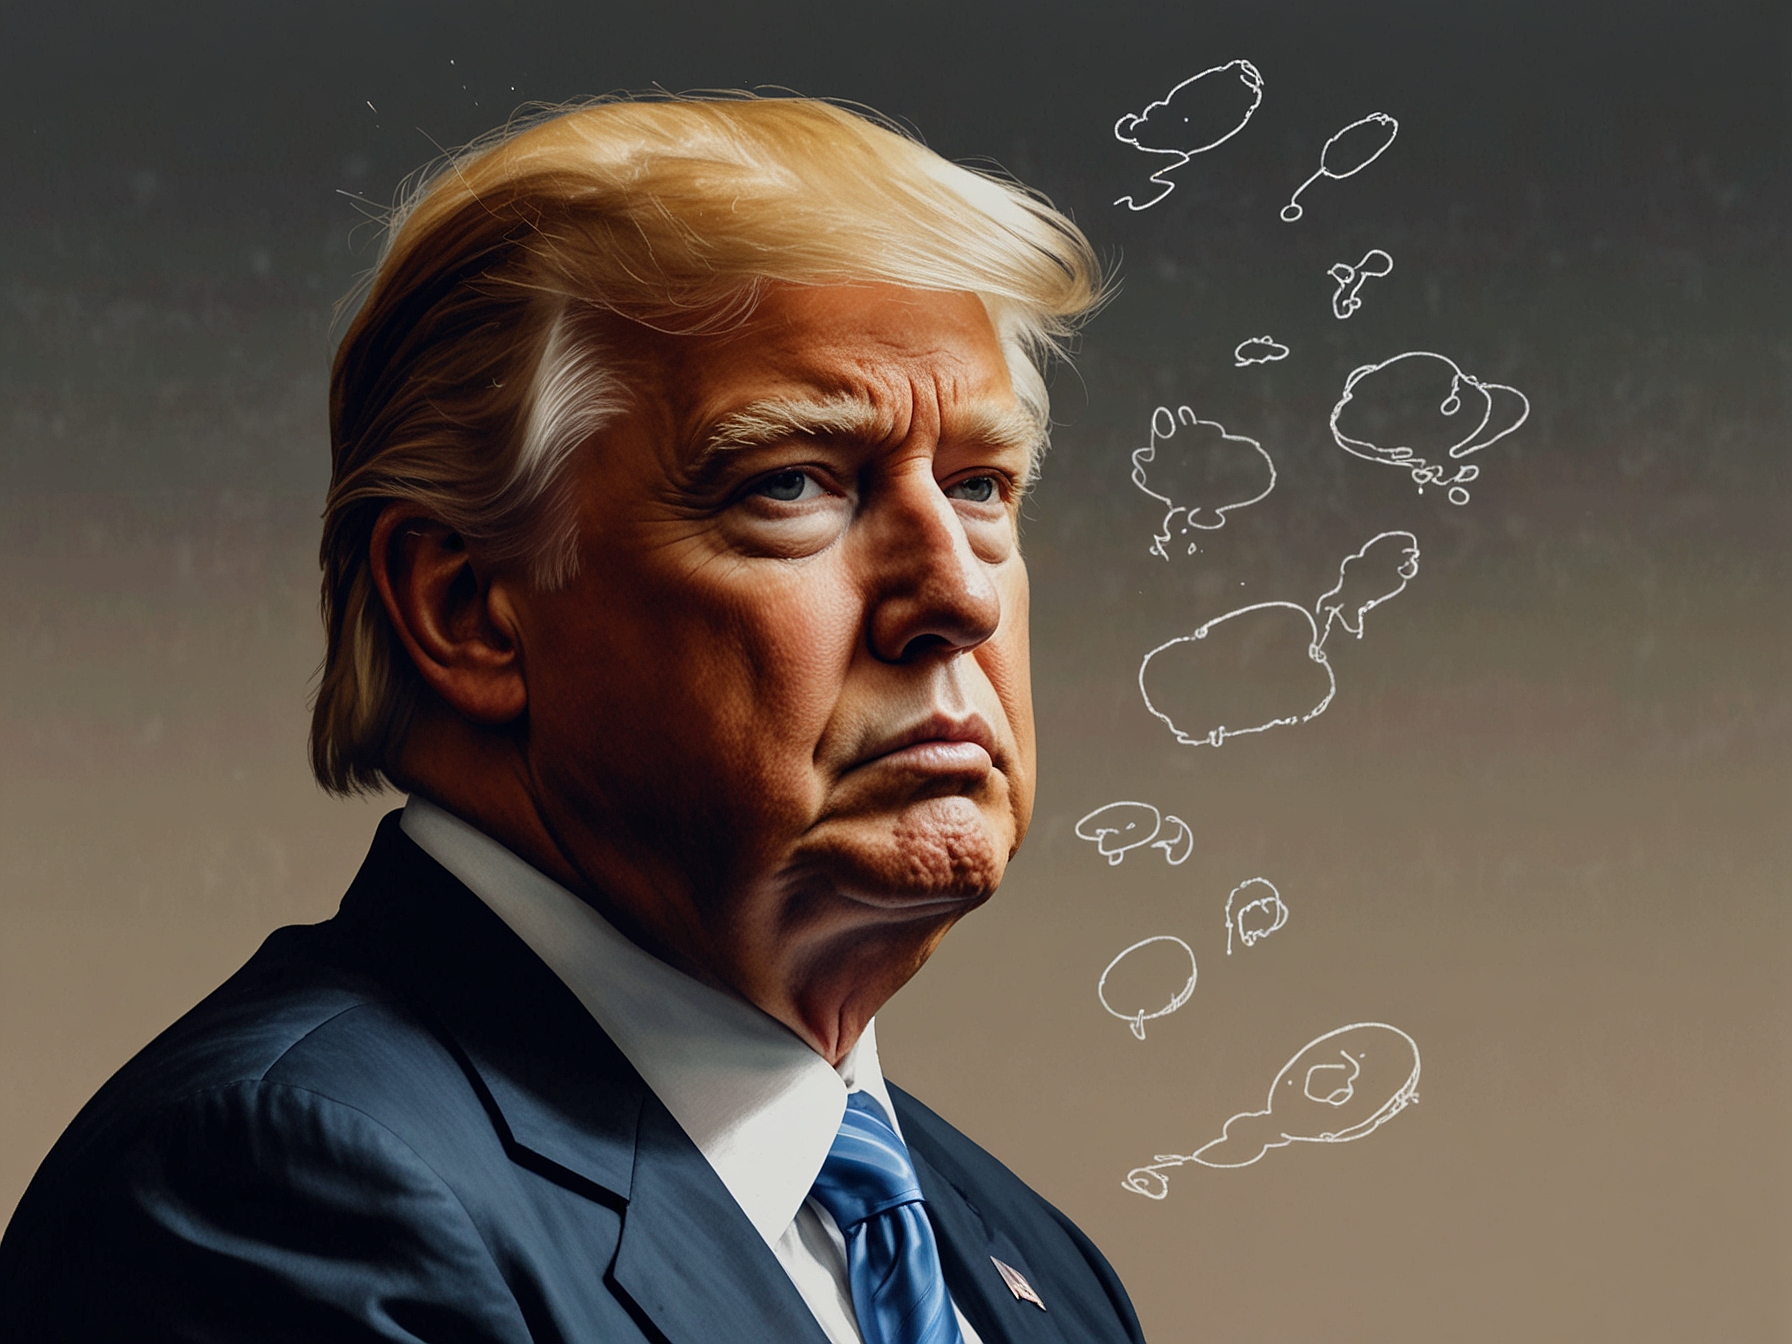 Illustration of Trump in a political setting, visibly confused, with thought bubbles depicting memory lapses and off-topic thoughts. This highlights concerns about his cognitive abilities.